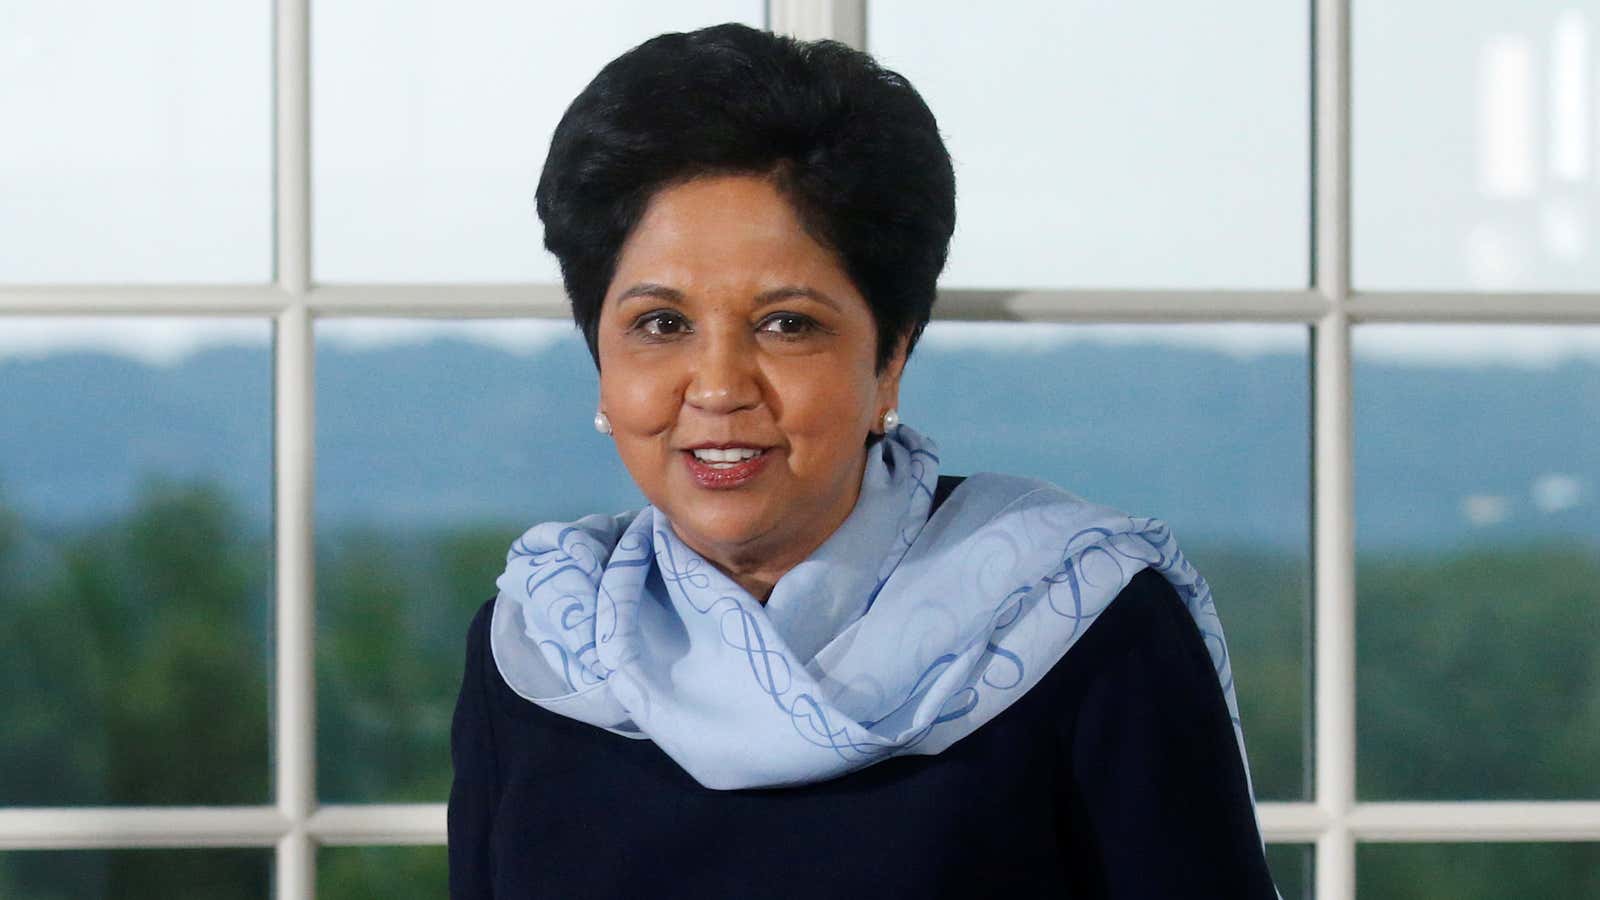 To some, Indra Nooyi’s departure leaves a bitter aftertaste.